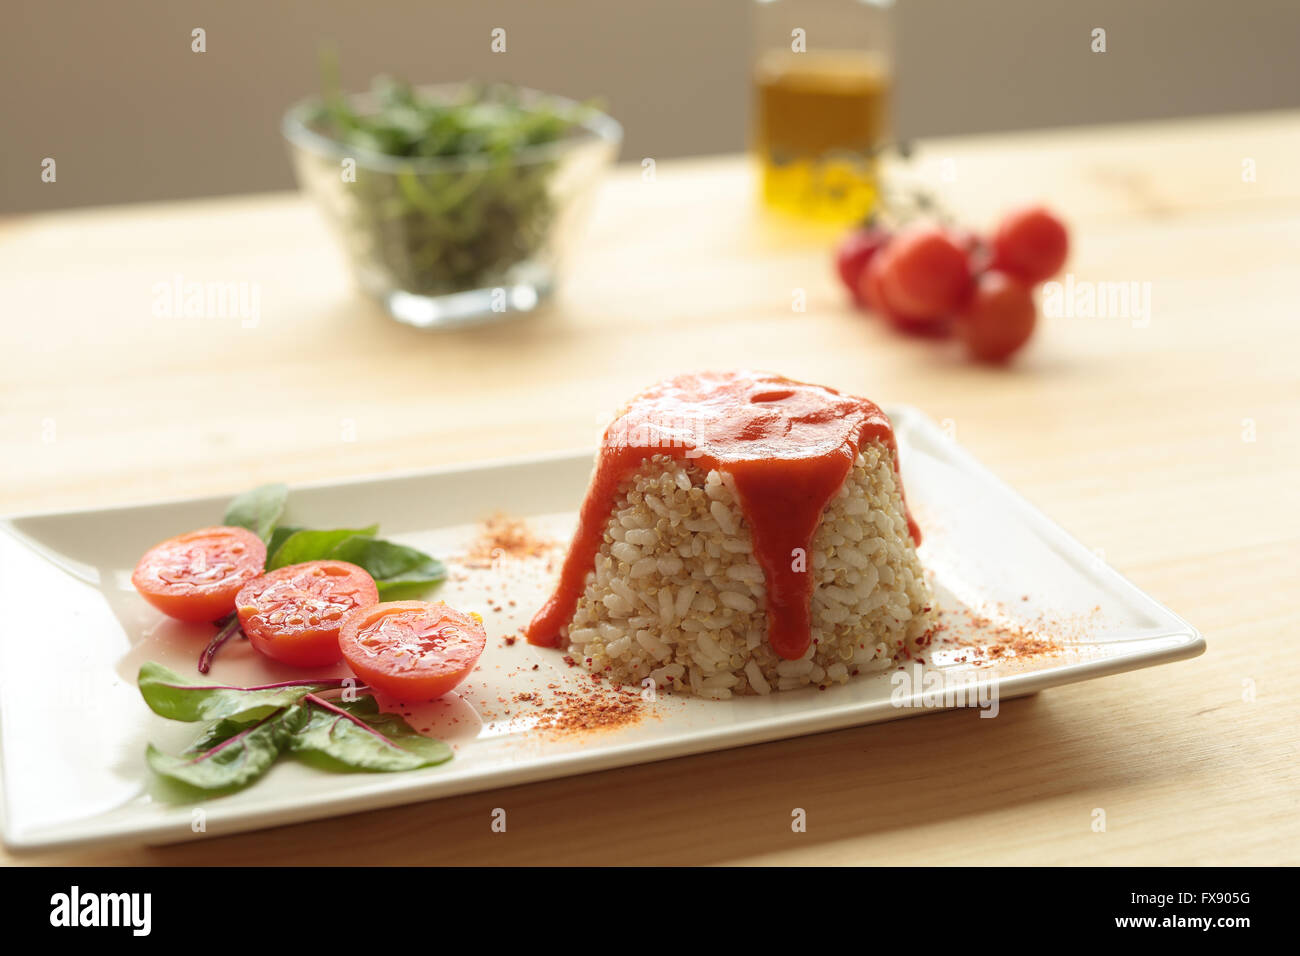 Cuban style rice decorated with cherrys tomatoes and a green leaves Stock Photo